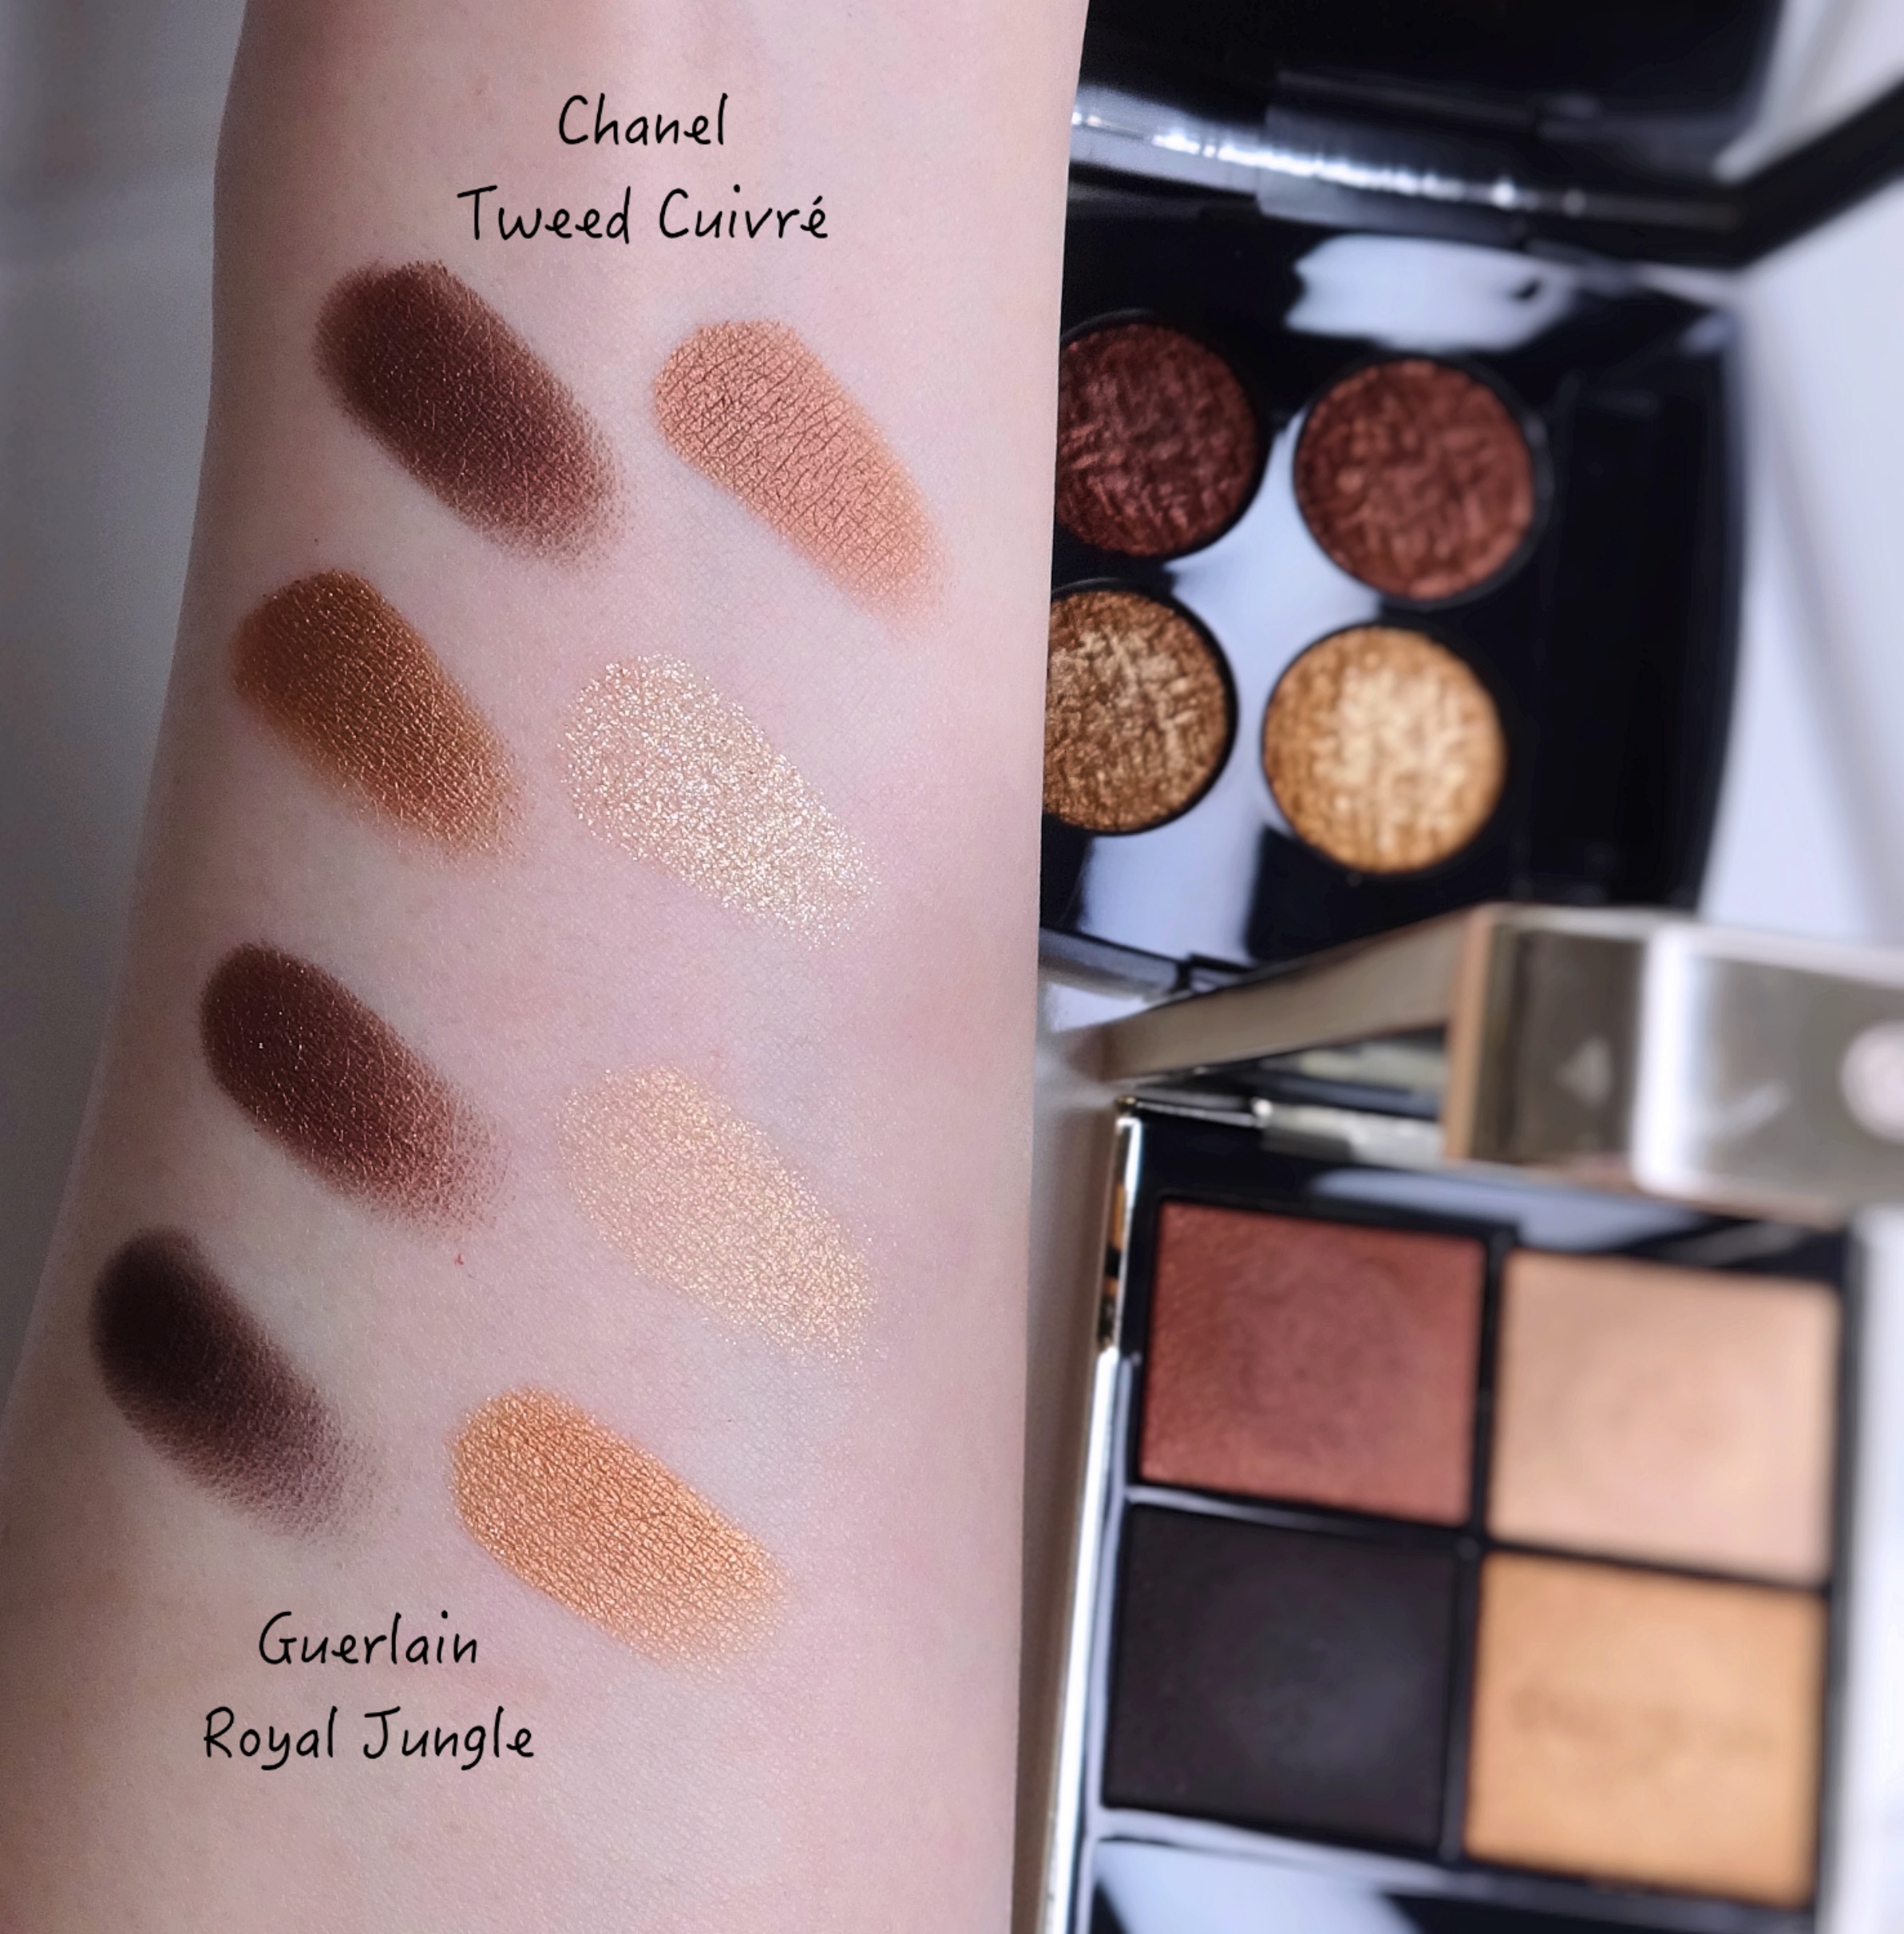 Chanel Tweed Cuivre comparison swatches